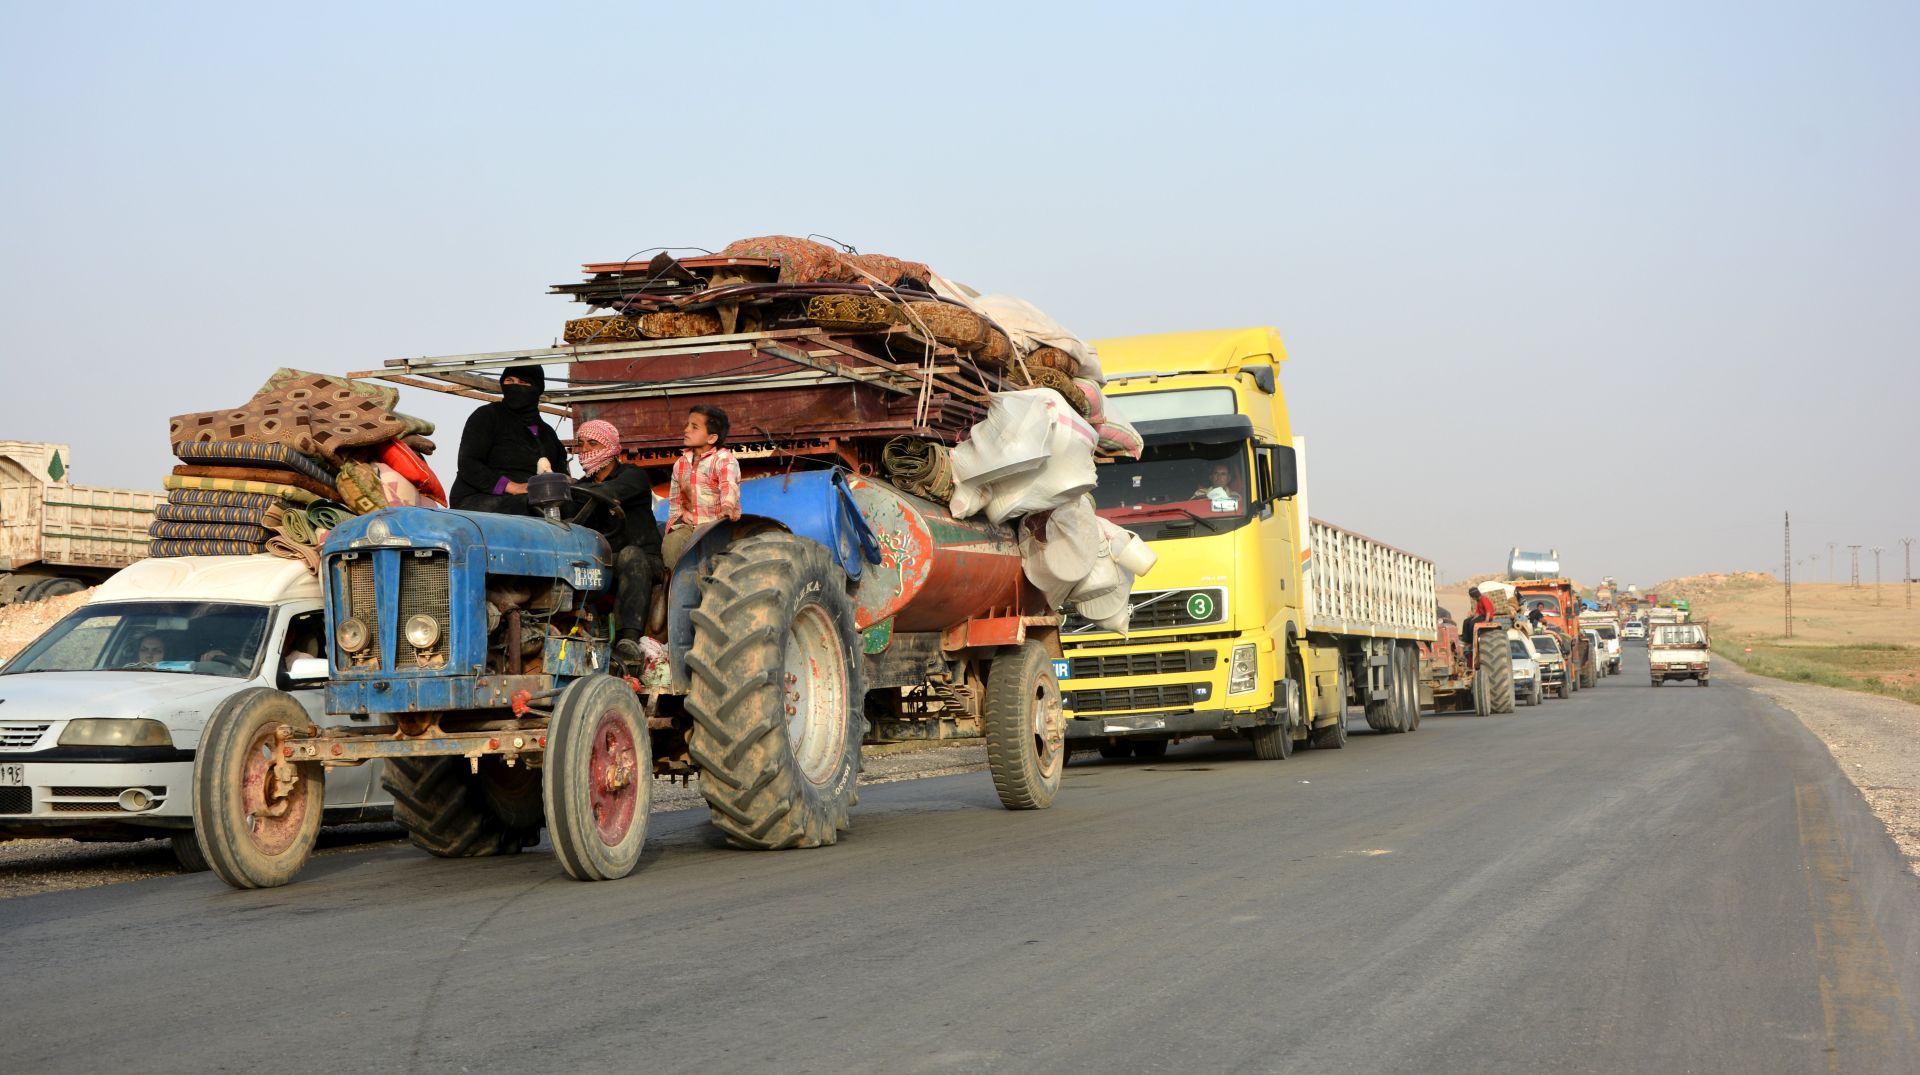 epa05968240 People ride on trucks as they flee Raqqa city, northern Syria, 14 May 2017 (Issued 16 May 2017). Thousand of civilians living in Raqqa are fleeing the hold of the Islamic State (IS) as the Syrian Democratic Forces (QSD) are advancing on the city.  EPA/YOUSSEF YOUSSEF